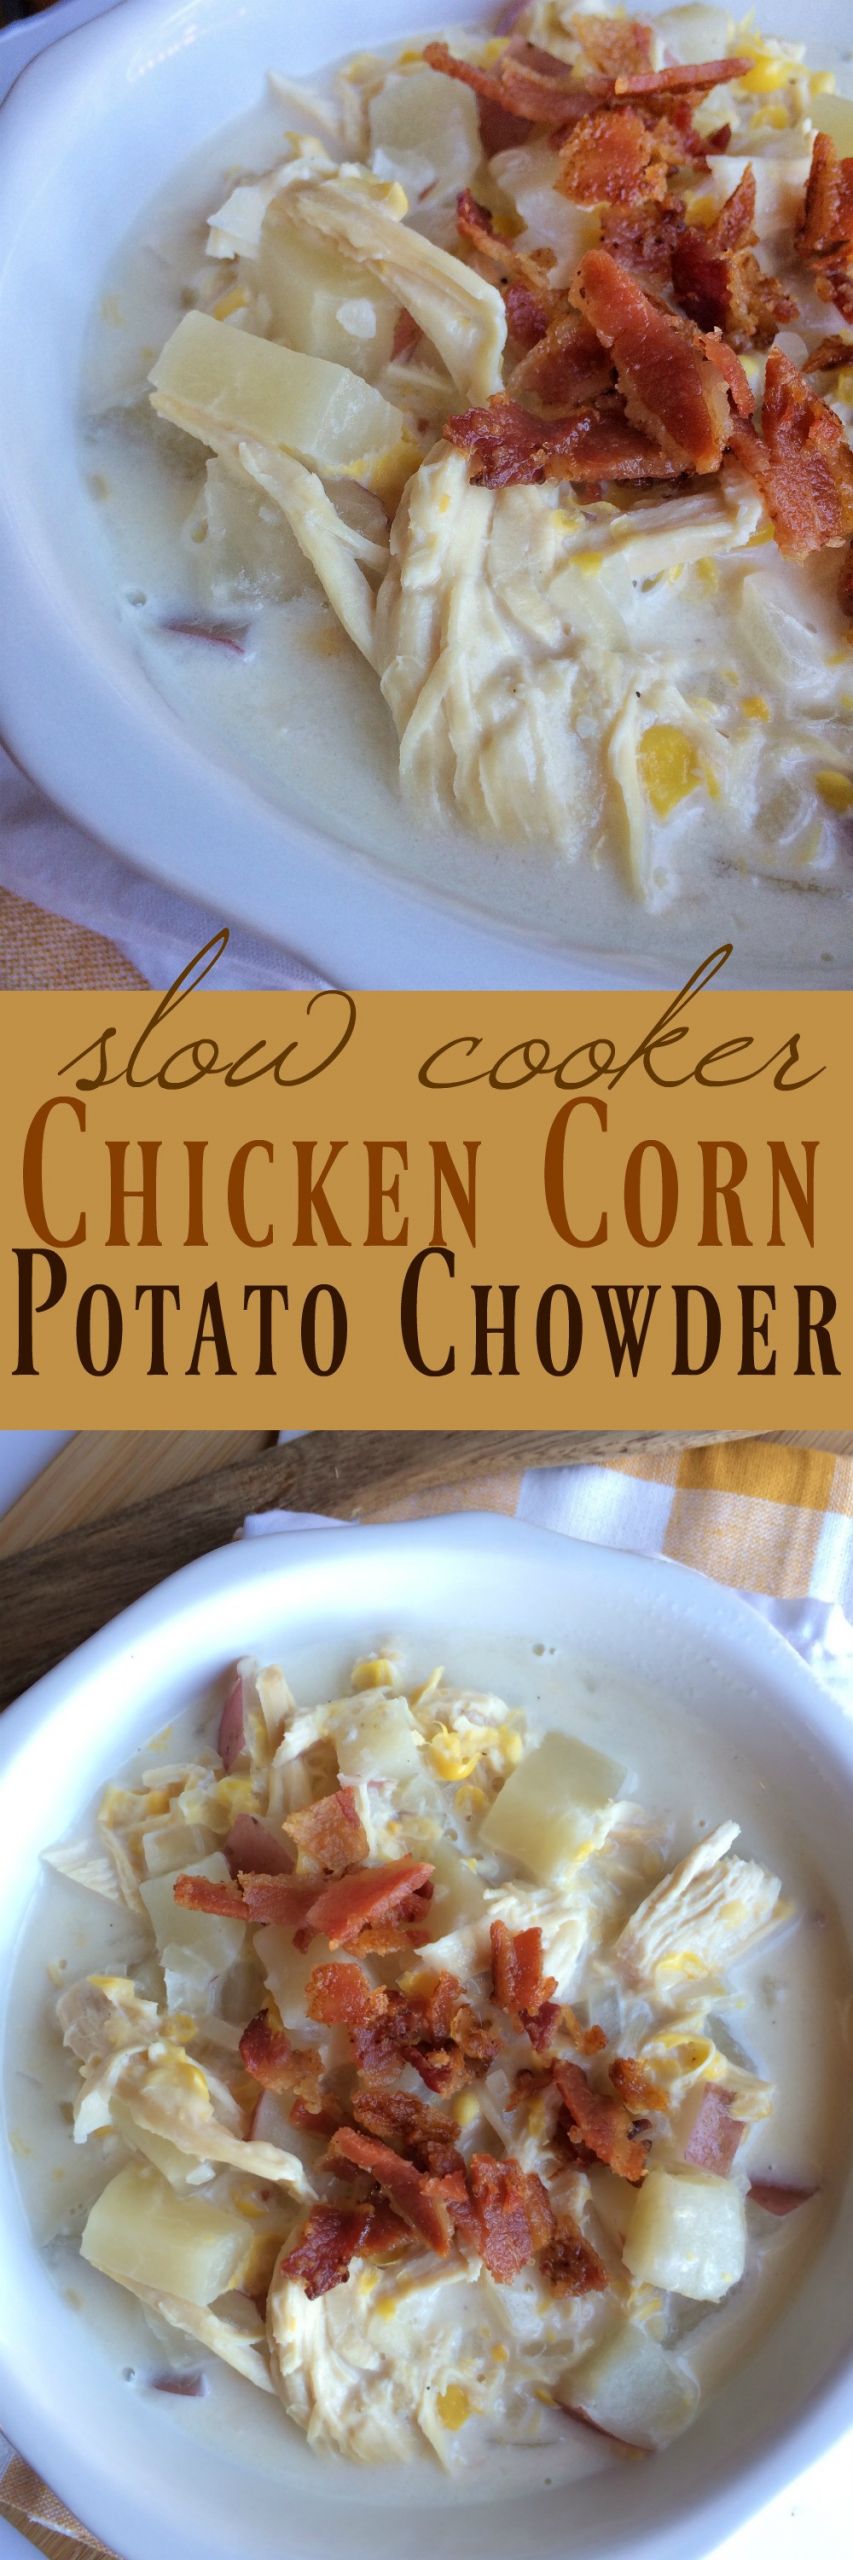 Chicken Corn Chowder Slow Cooker
 Slow Cooker Chicken Corn Potato Chowder To her as Family